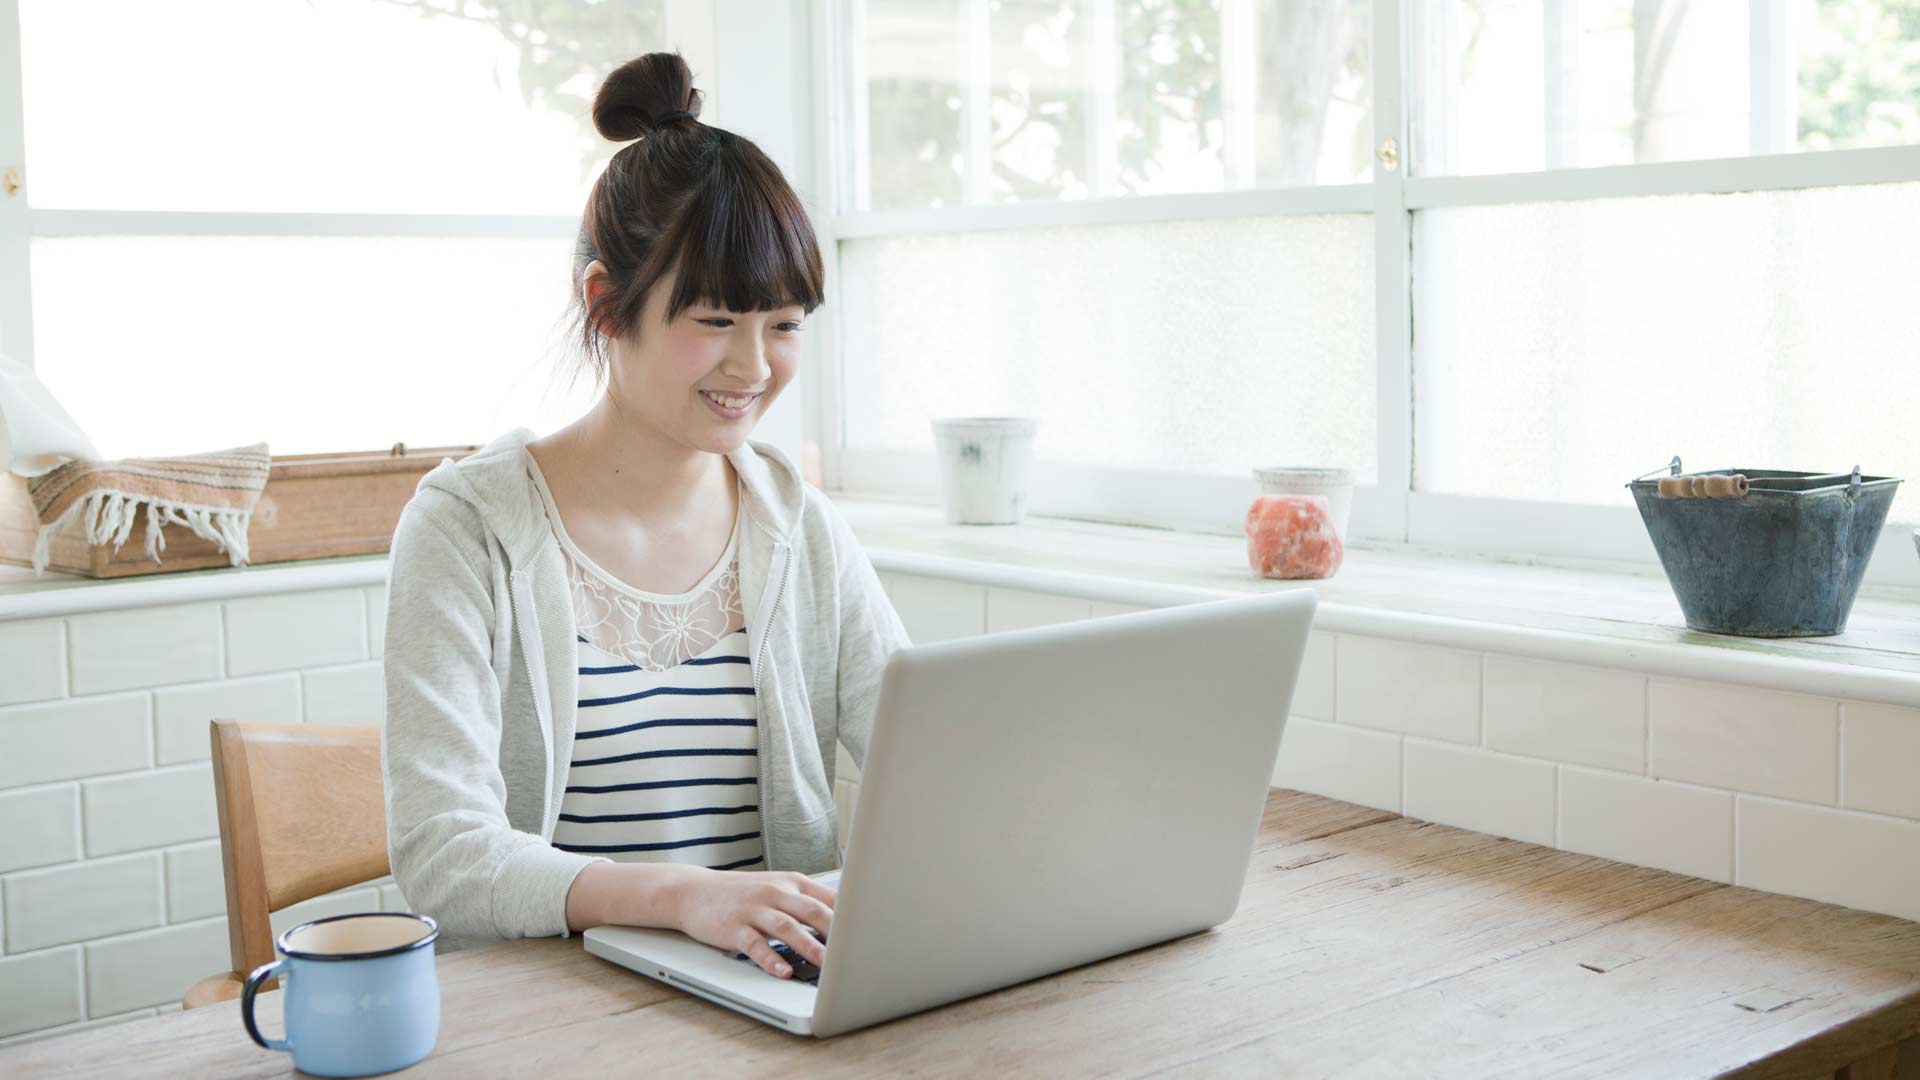 Young Asian woman on her laptop. Young Asian woman on her laptop wearing a gray cardigan over a striped shirt.